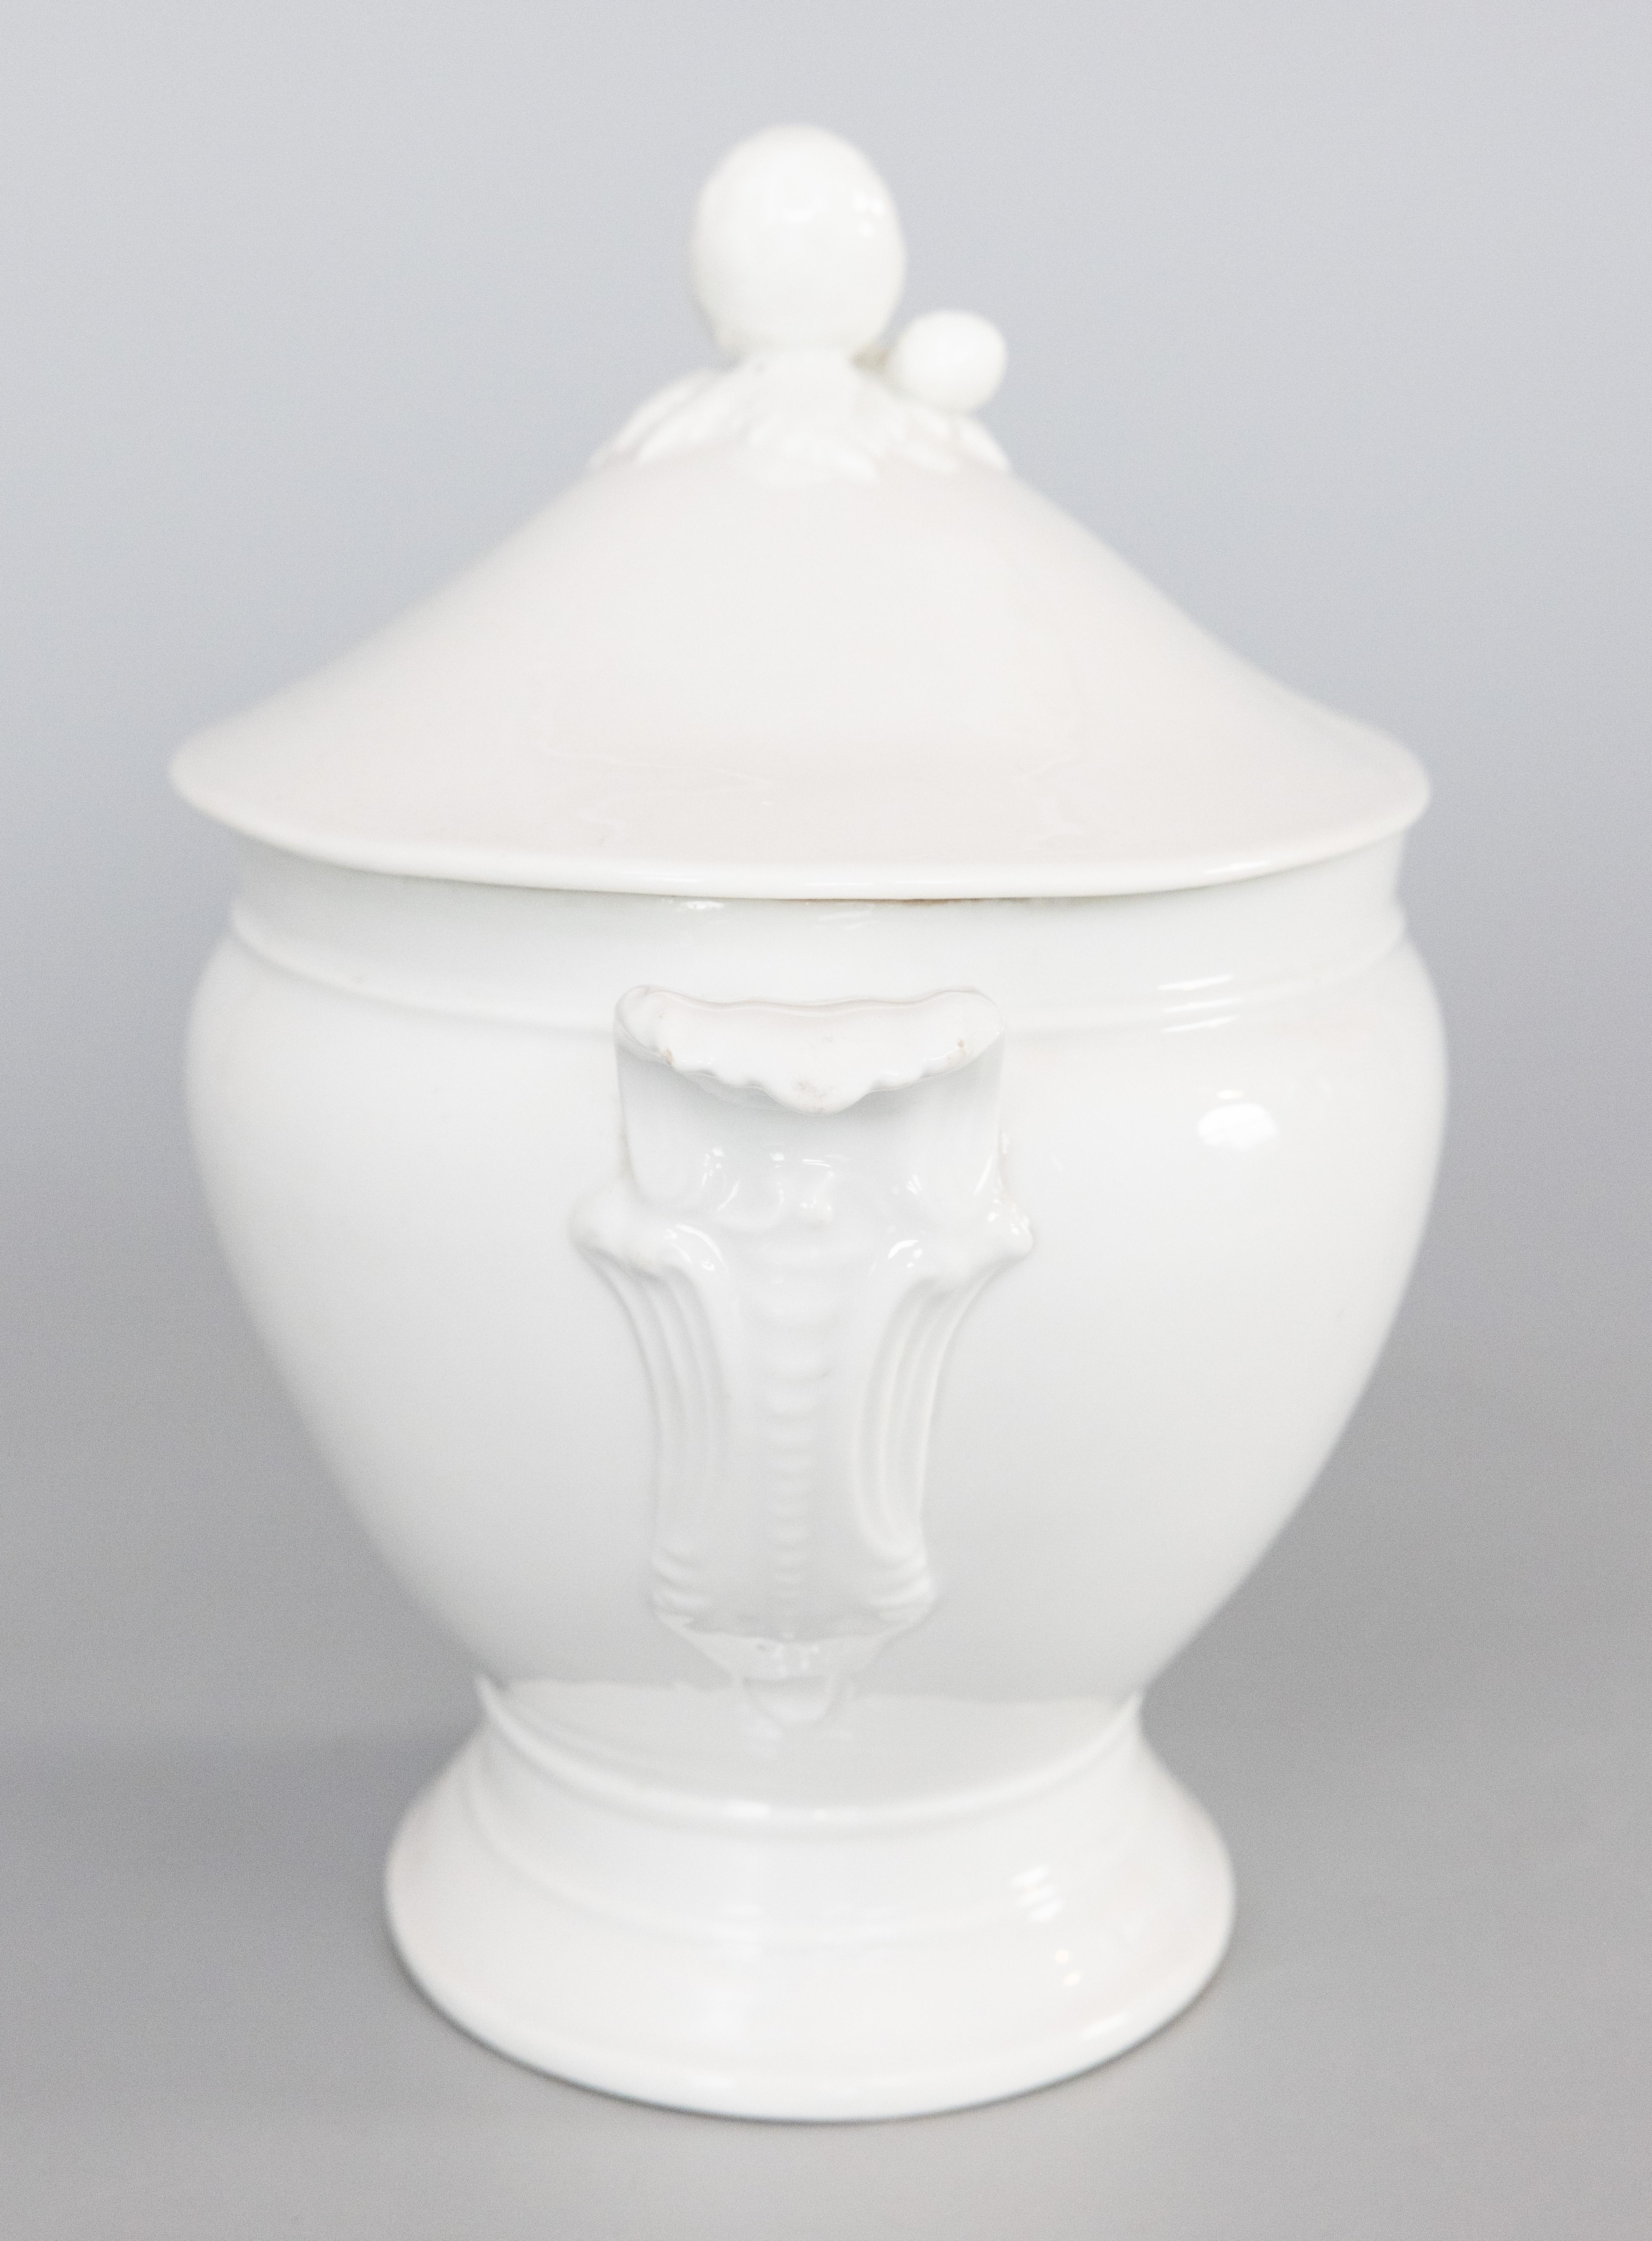 A gorgeous large antique French white ironstone porcelain lidded soup tureen soupière, circa 1900. No maker's mark. This fine soup tureen has a large oval design, decorative acorn finial, and lovely ornate scrolling leaf handles. It displays